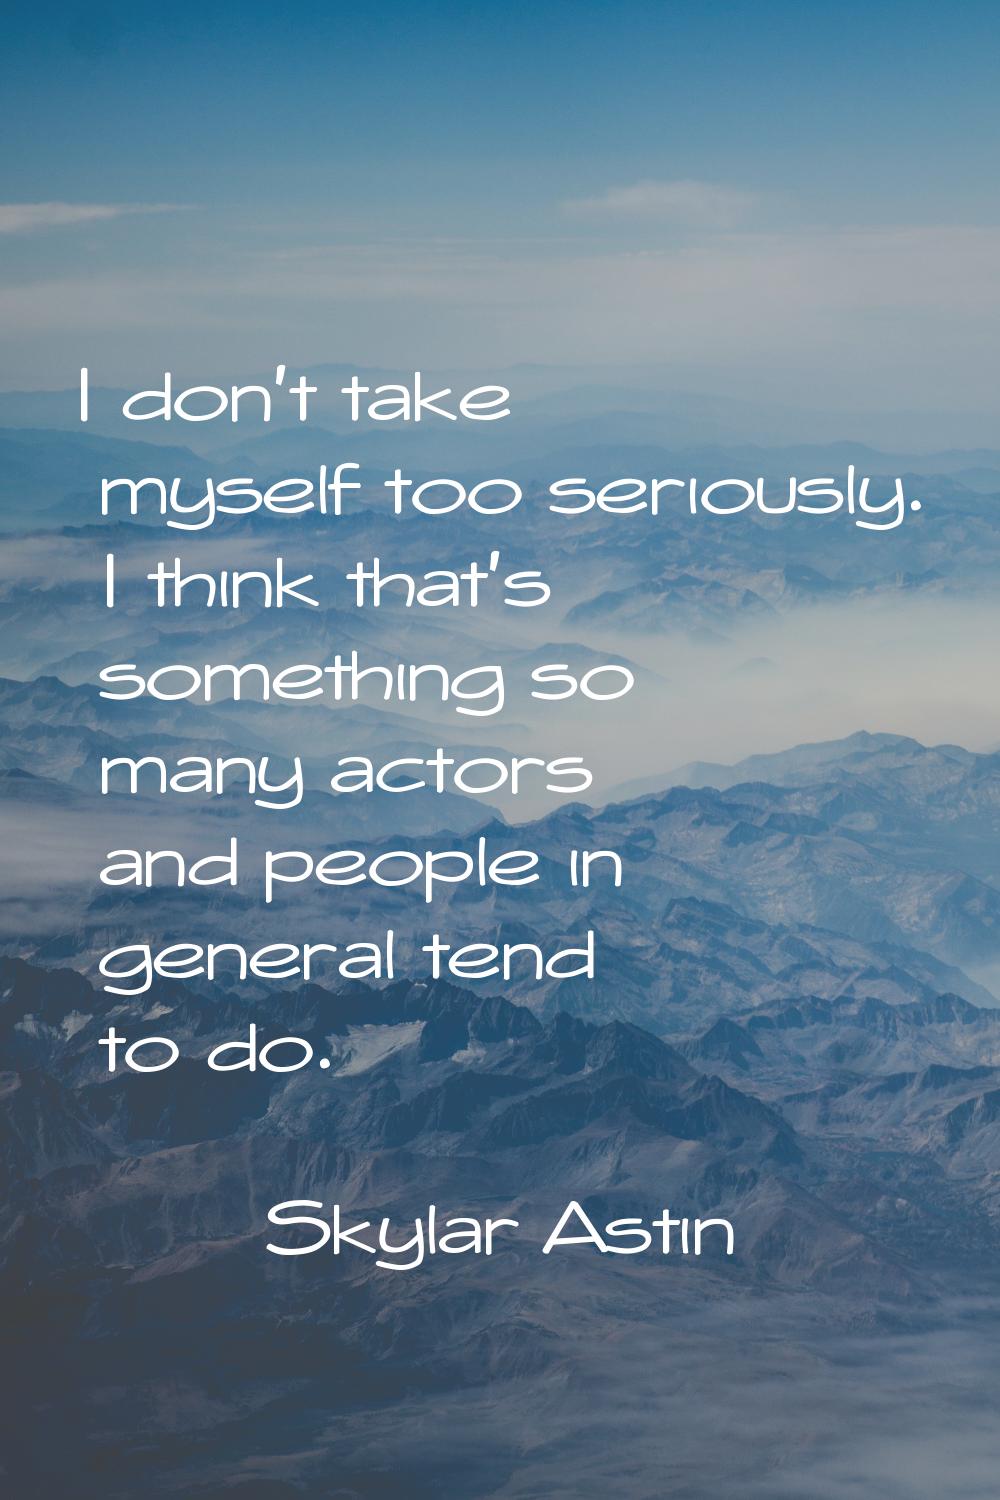 I don't take myself too seriously. I think that's something so many actors and people in general te